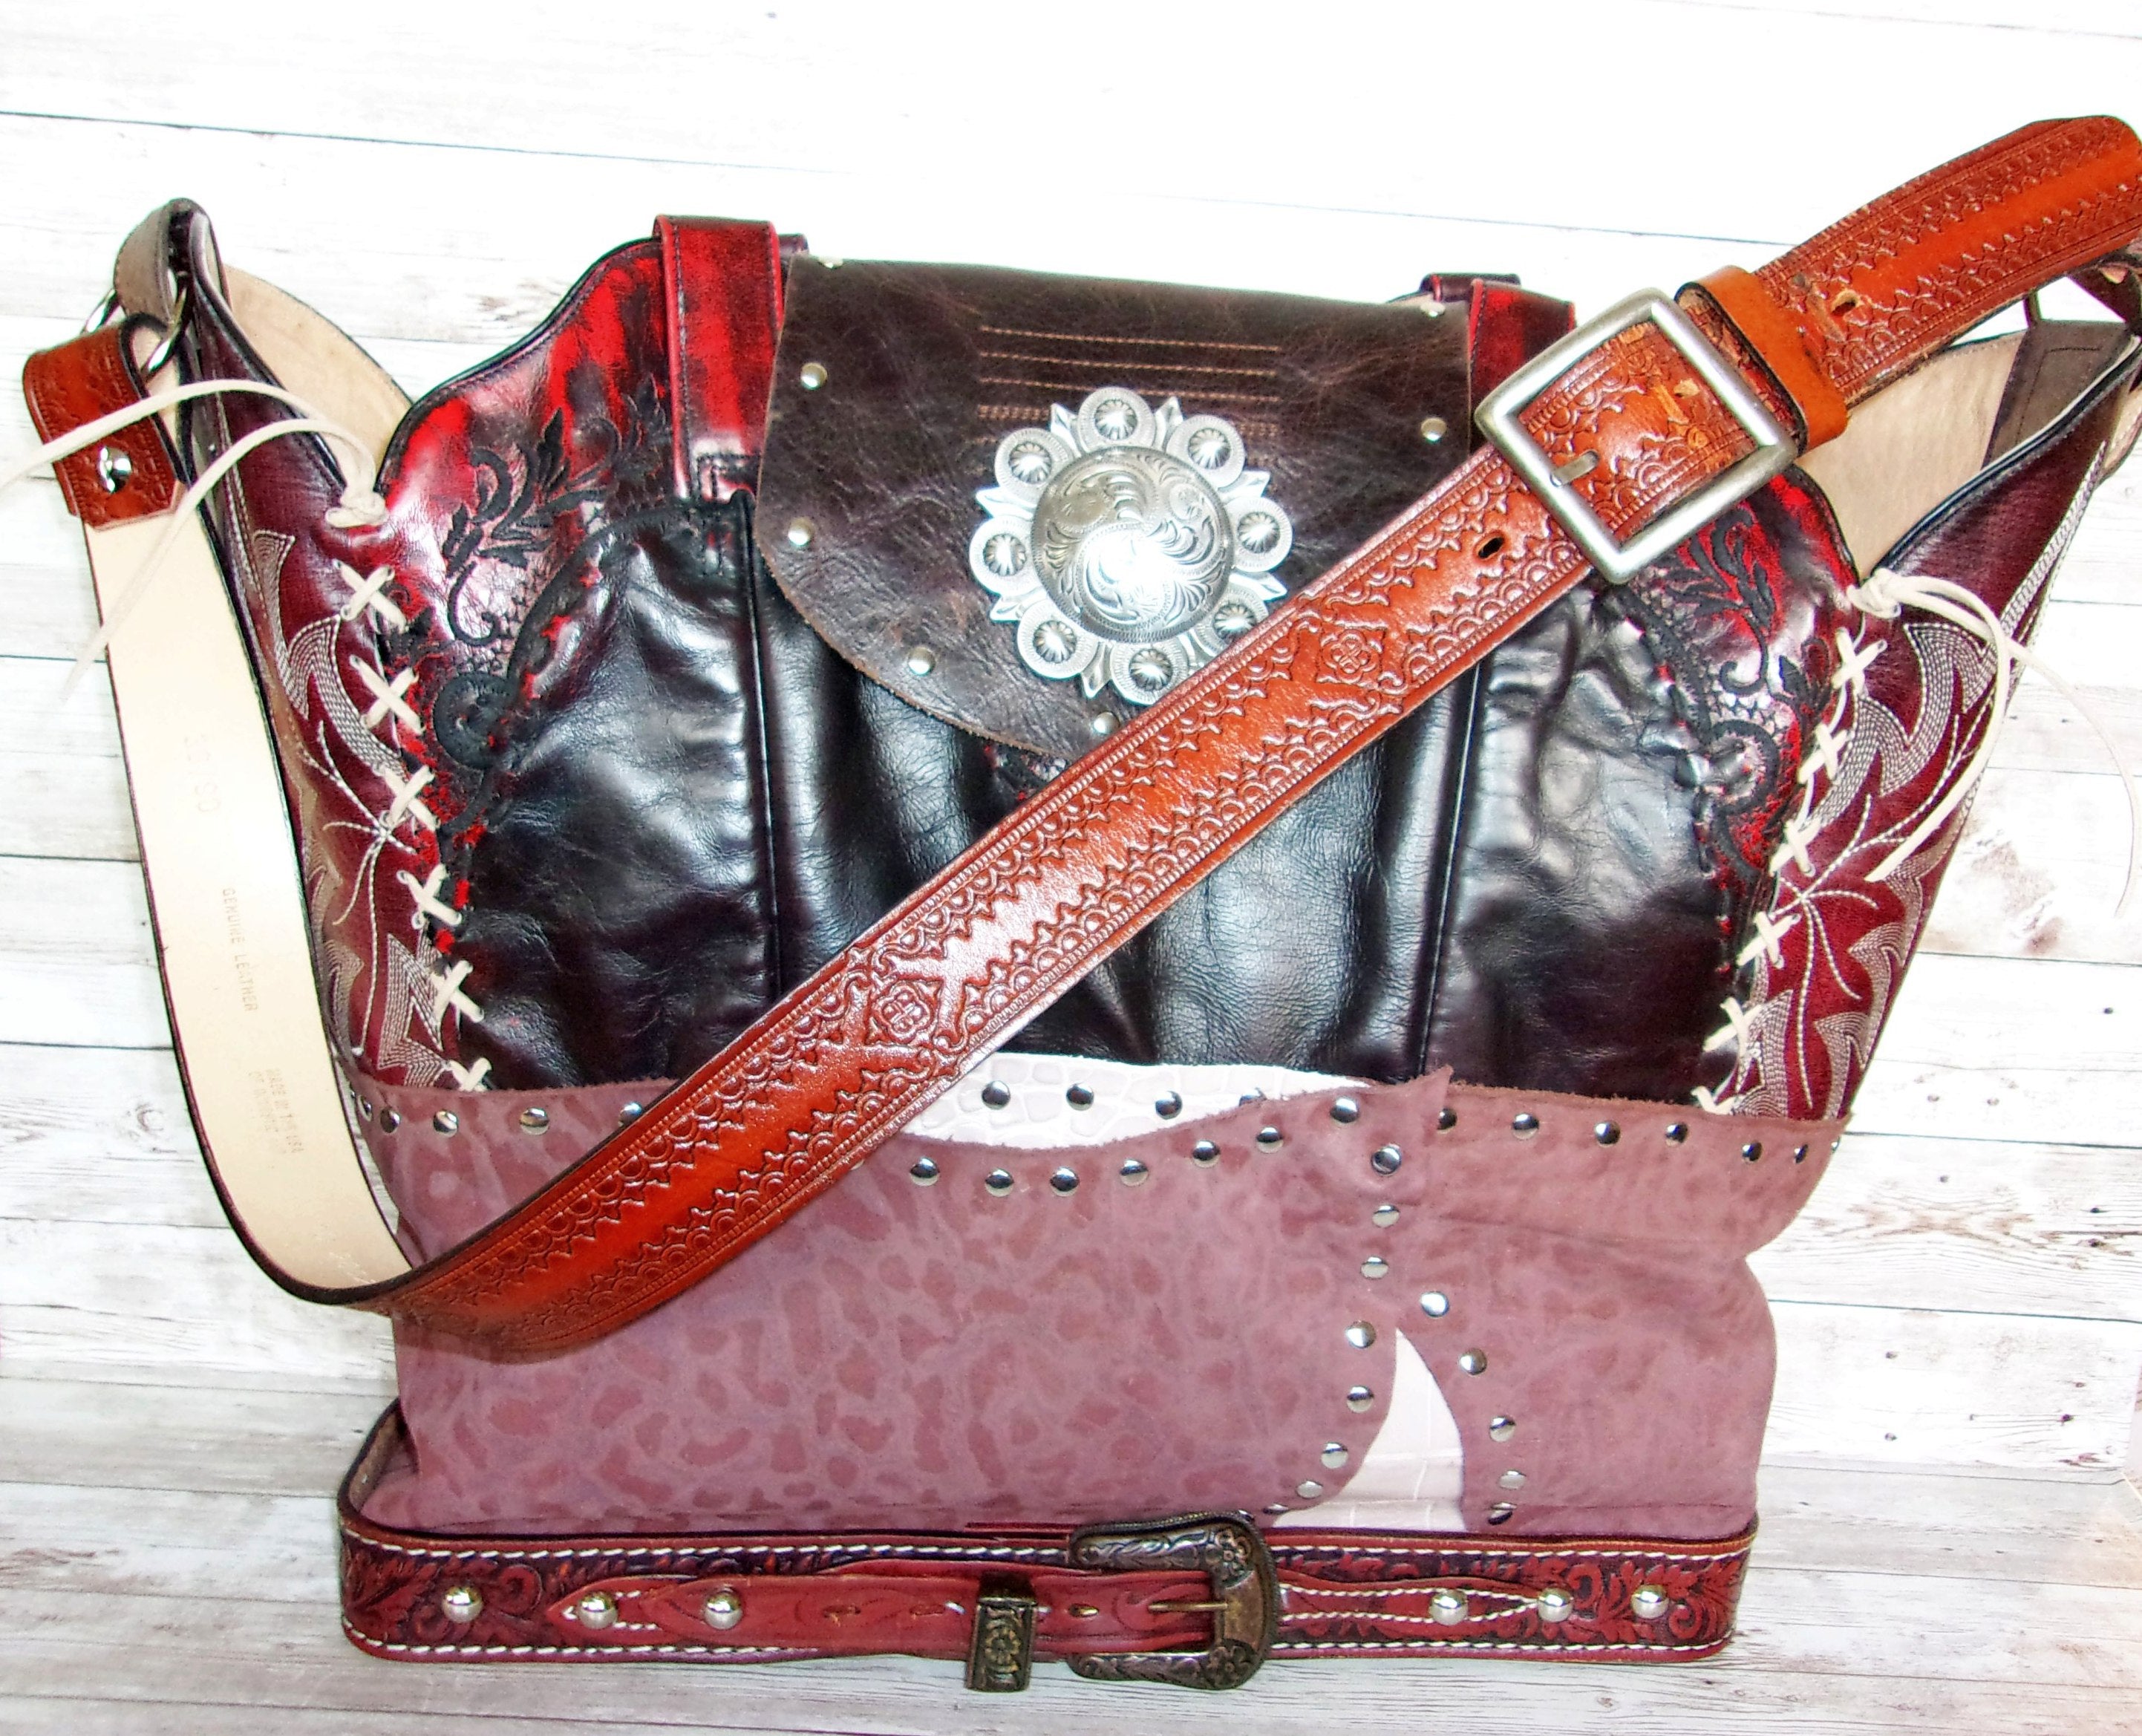 Western Laptop Tote - Extra Large Cowboy Boot Purse - Western Travel Bag LT40 cowboy boot purses, western fringe purse, handmade leather purses, boot purse, handmade western purse, custom leather handbags Chris Thompson Bags